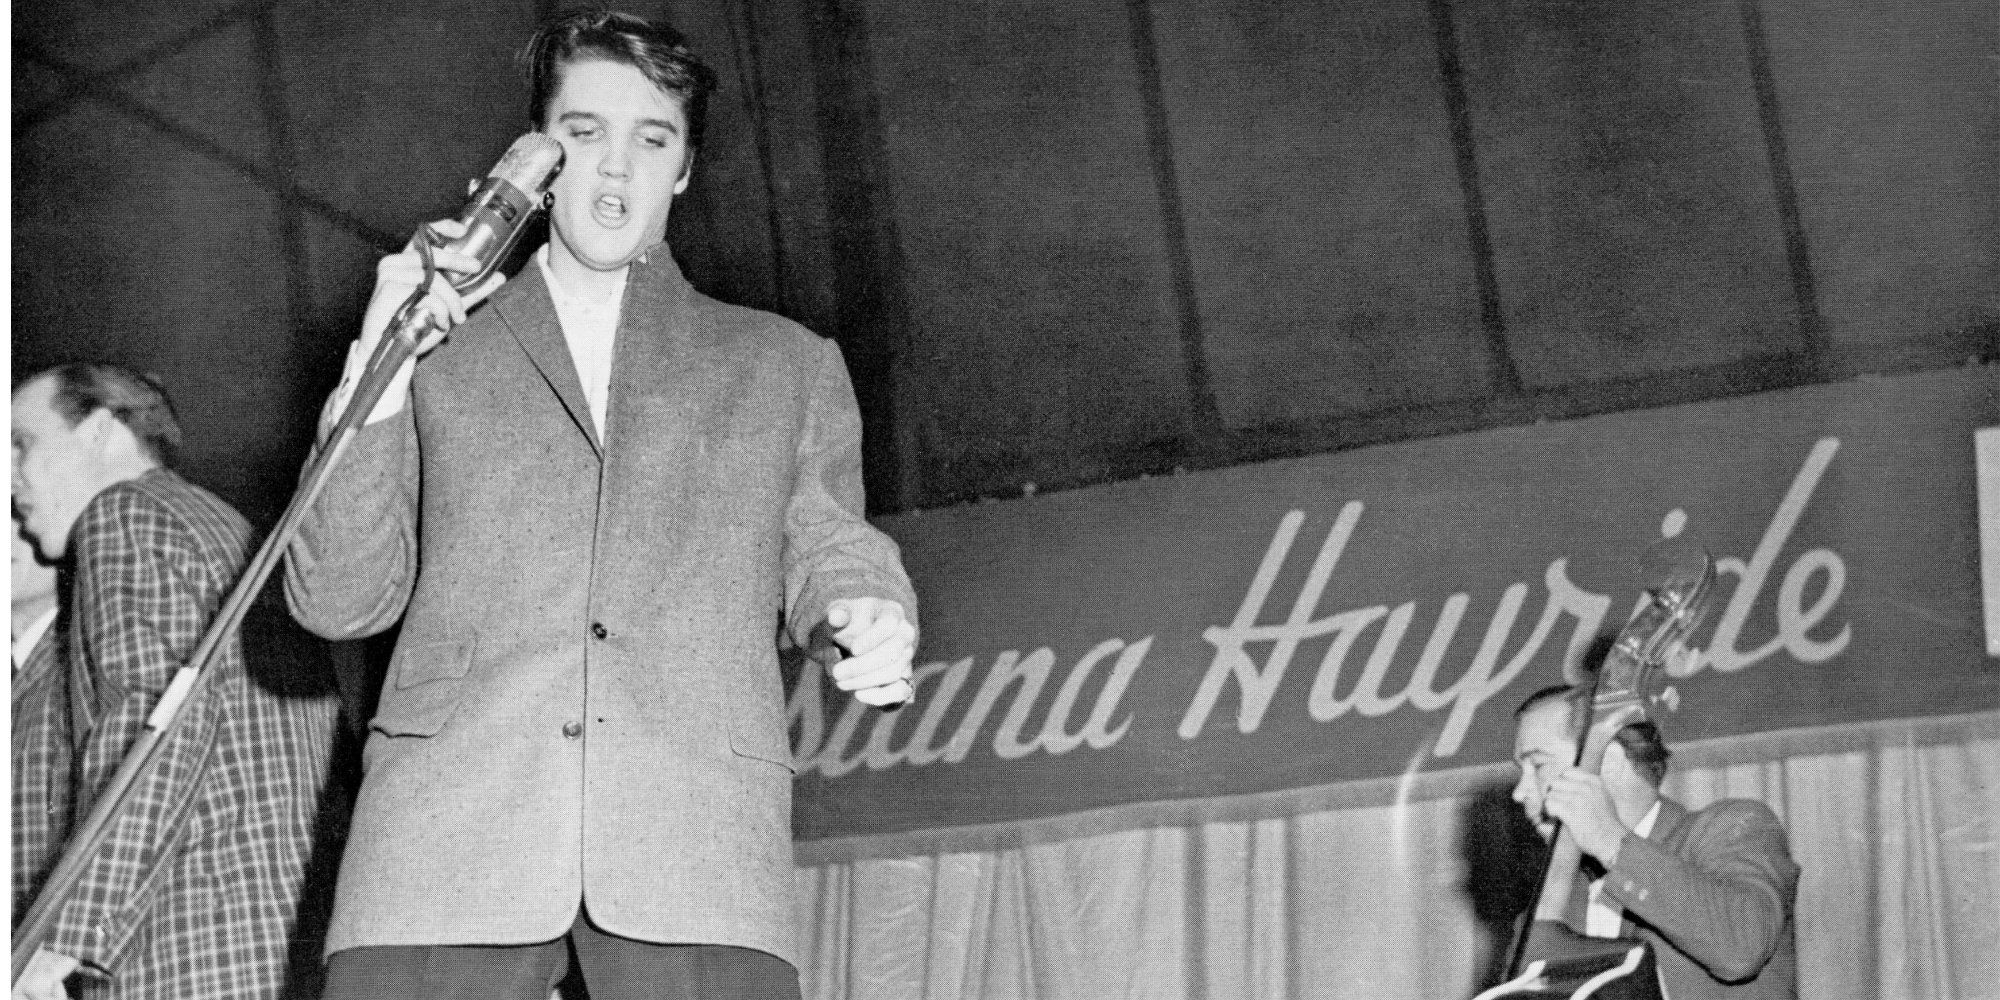 Elvis Presley was a featured performer on 'The Louisiana Hayride' in the early and mid 1950s.